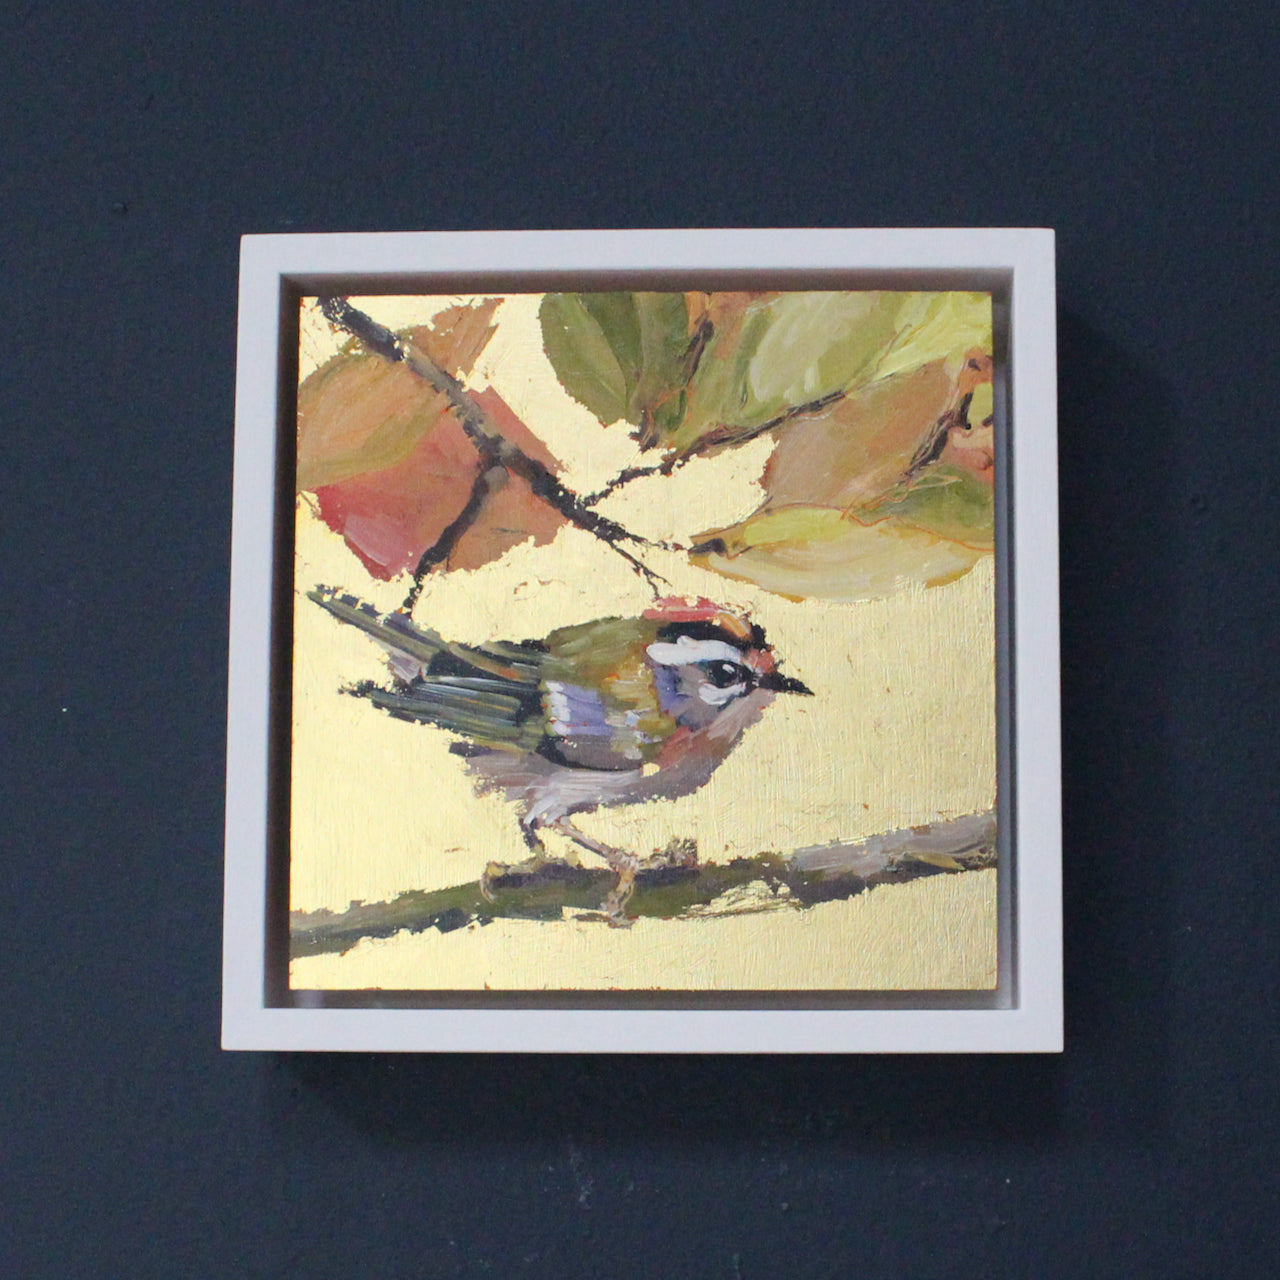 Jill Hudson painting of a firecrest bird on branch in foreground and brown & green leaves.